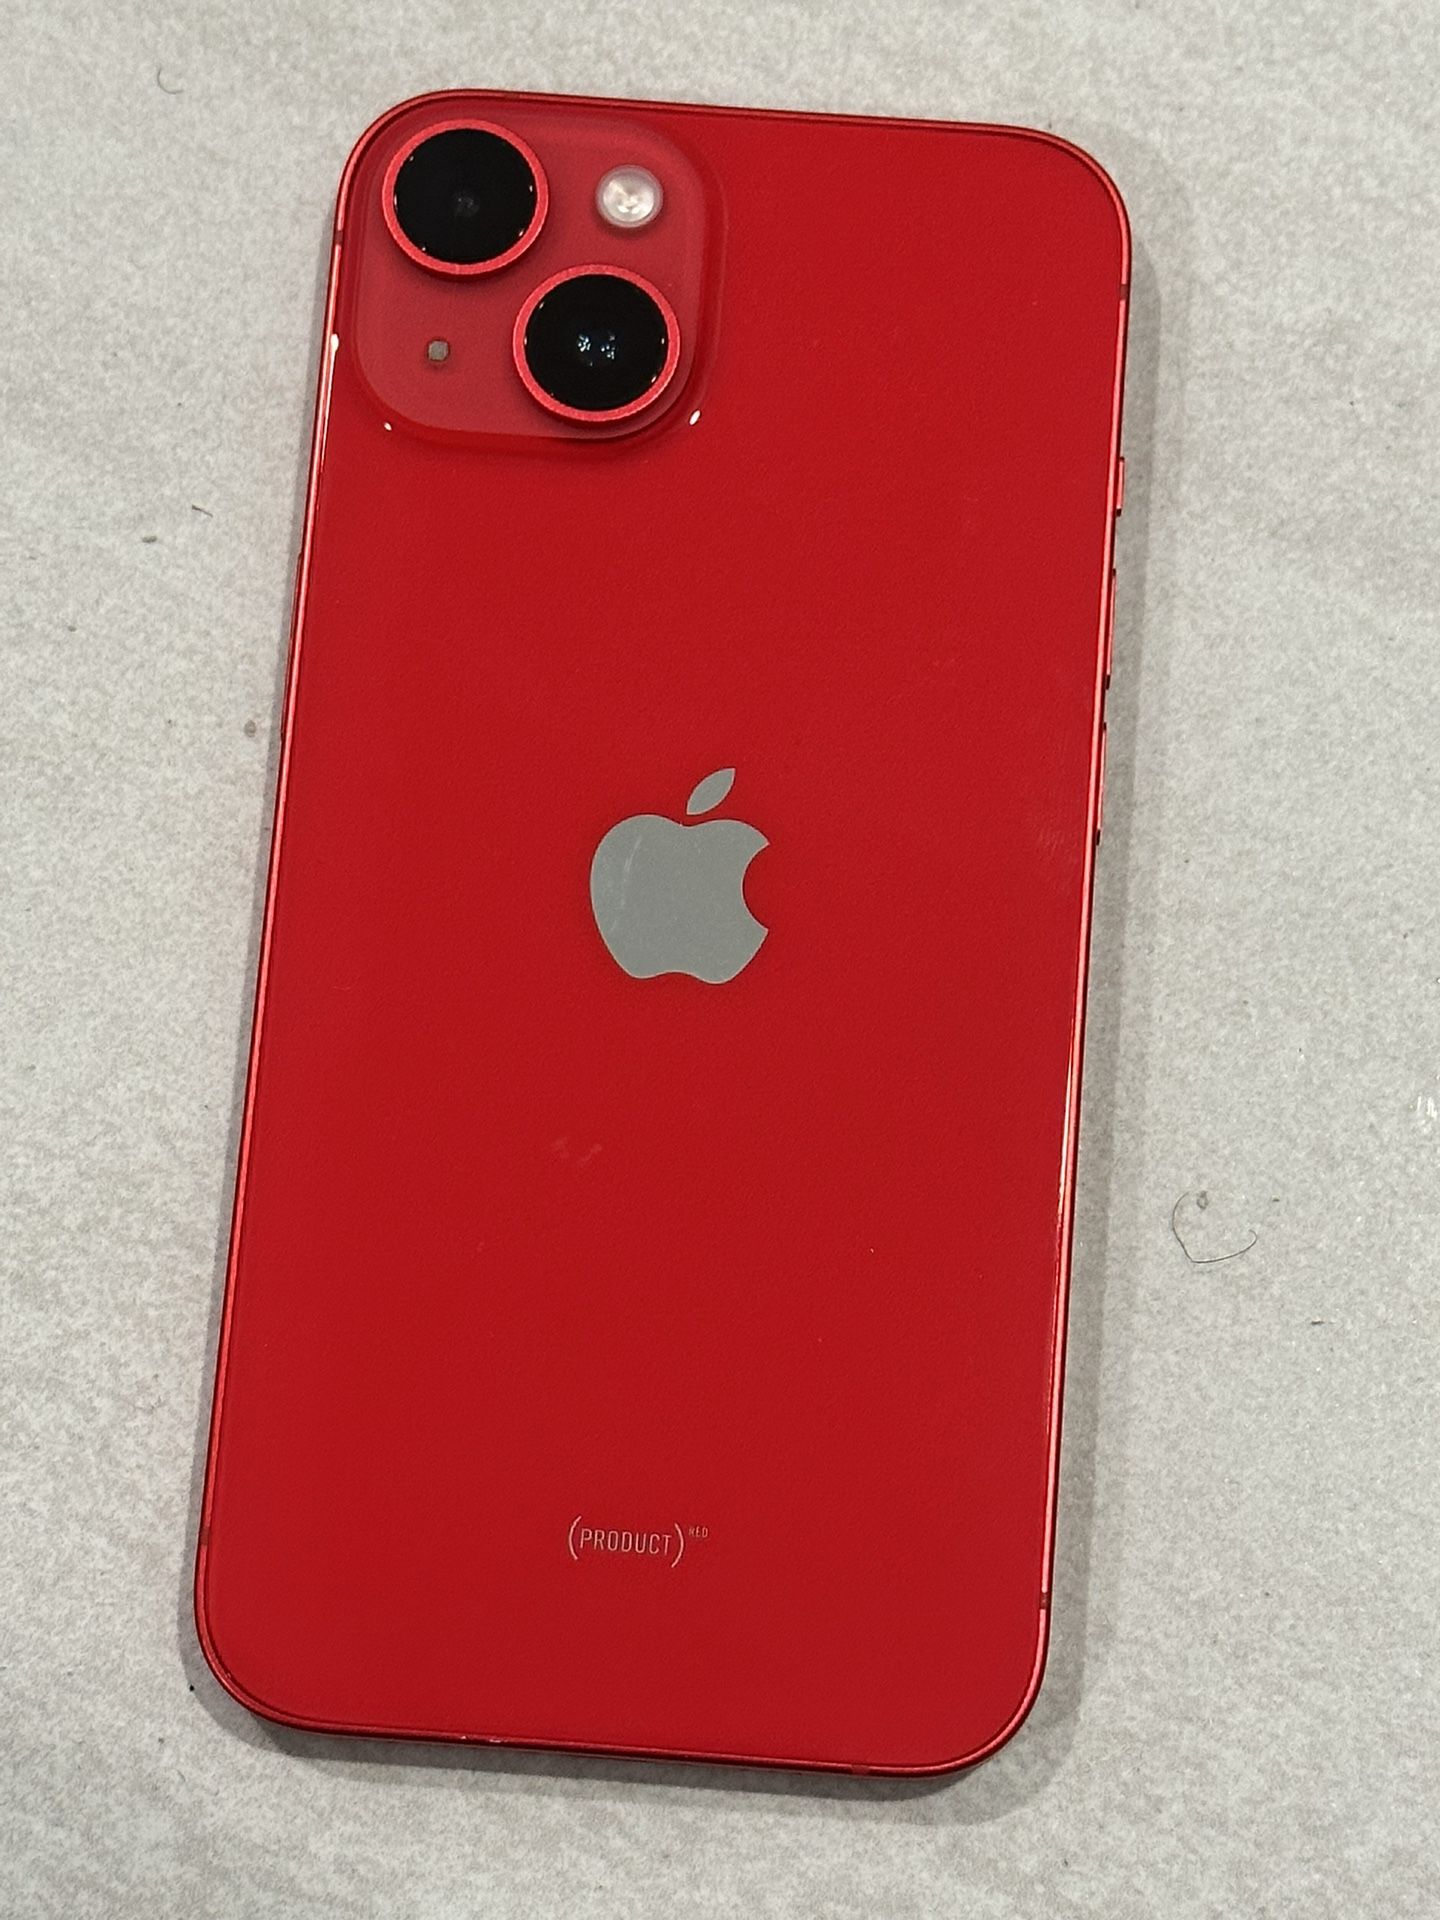 iPhone 14 (Red) 128GB (Cricket Wireless) includes Free Month Of Service!!!